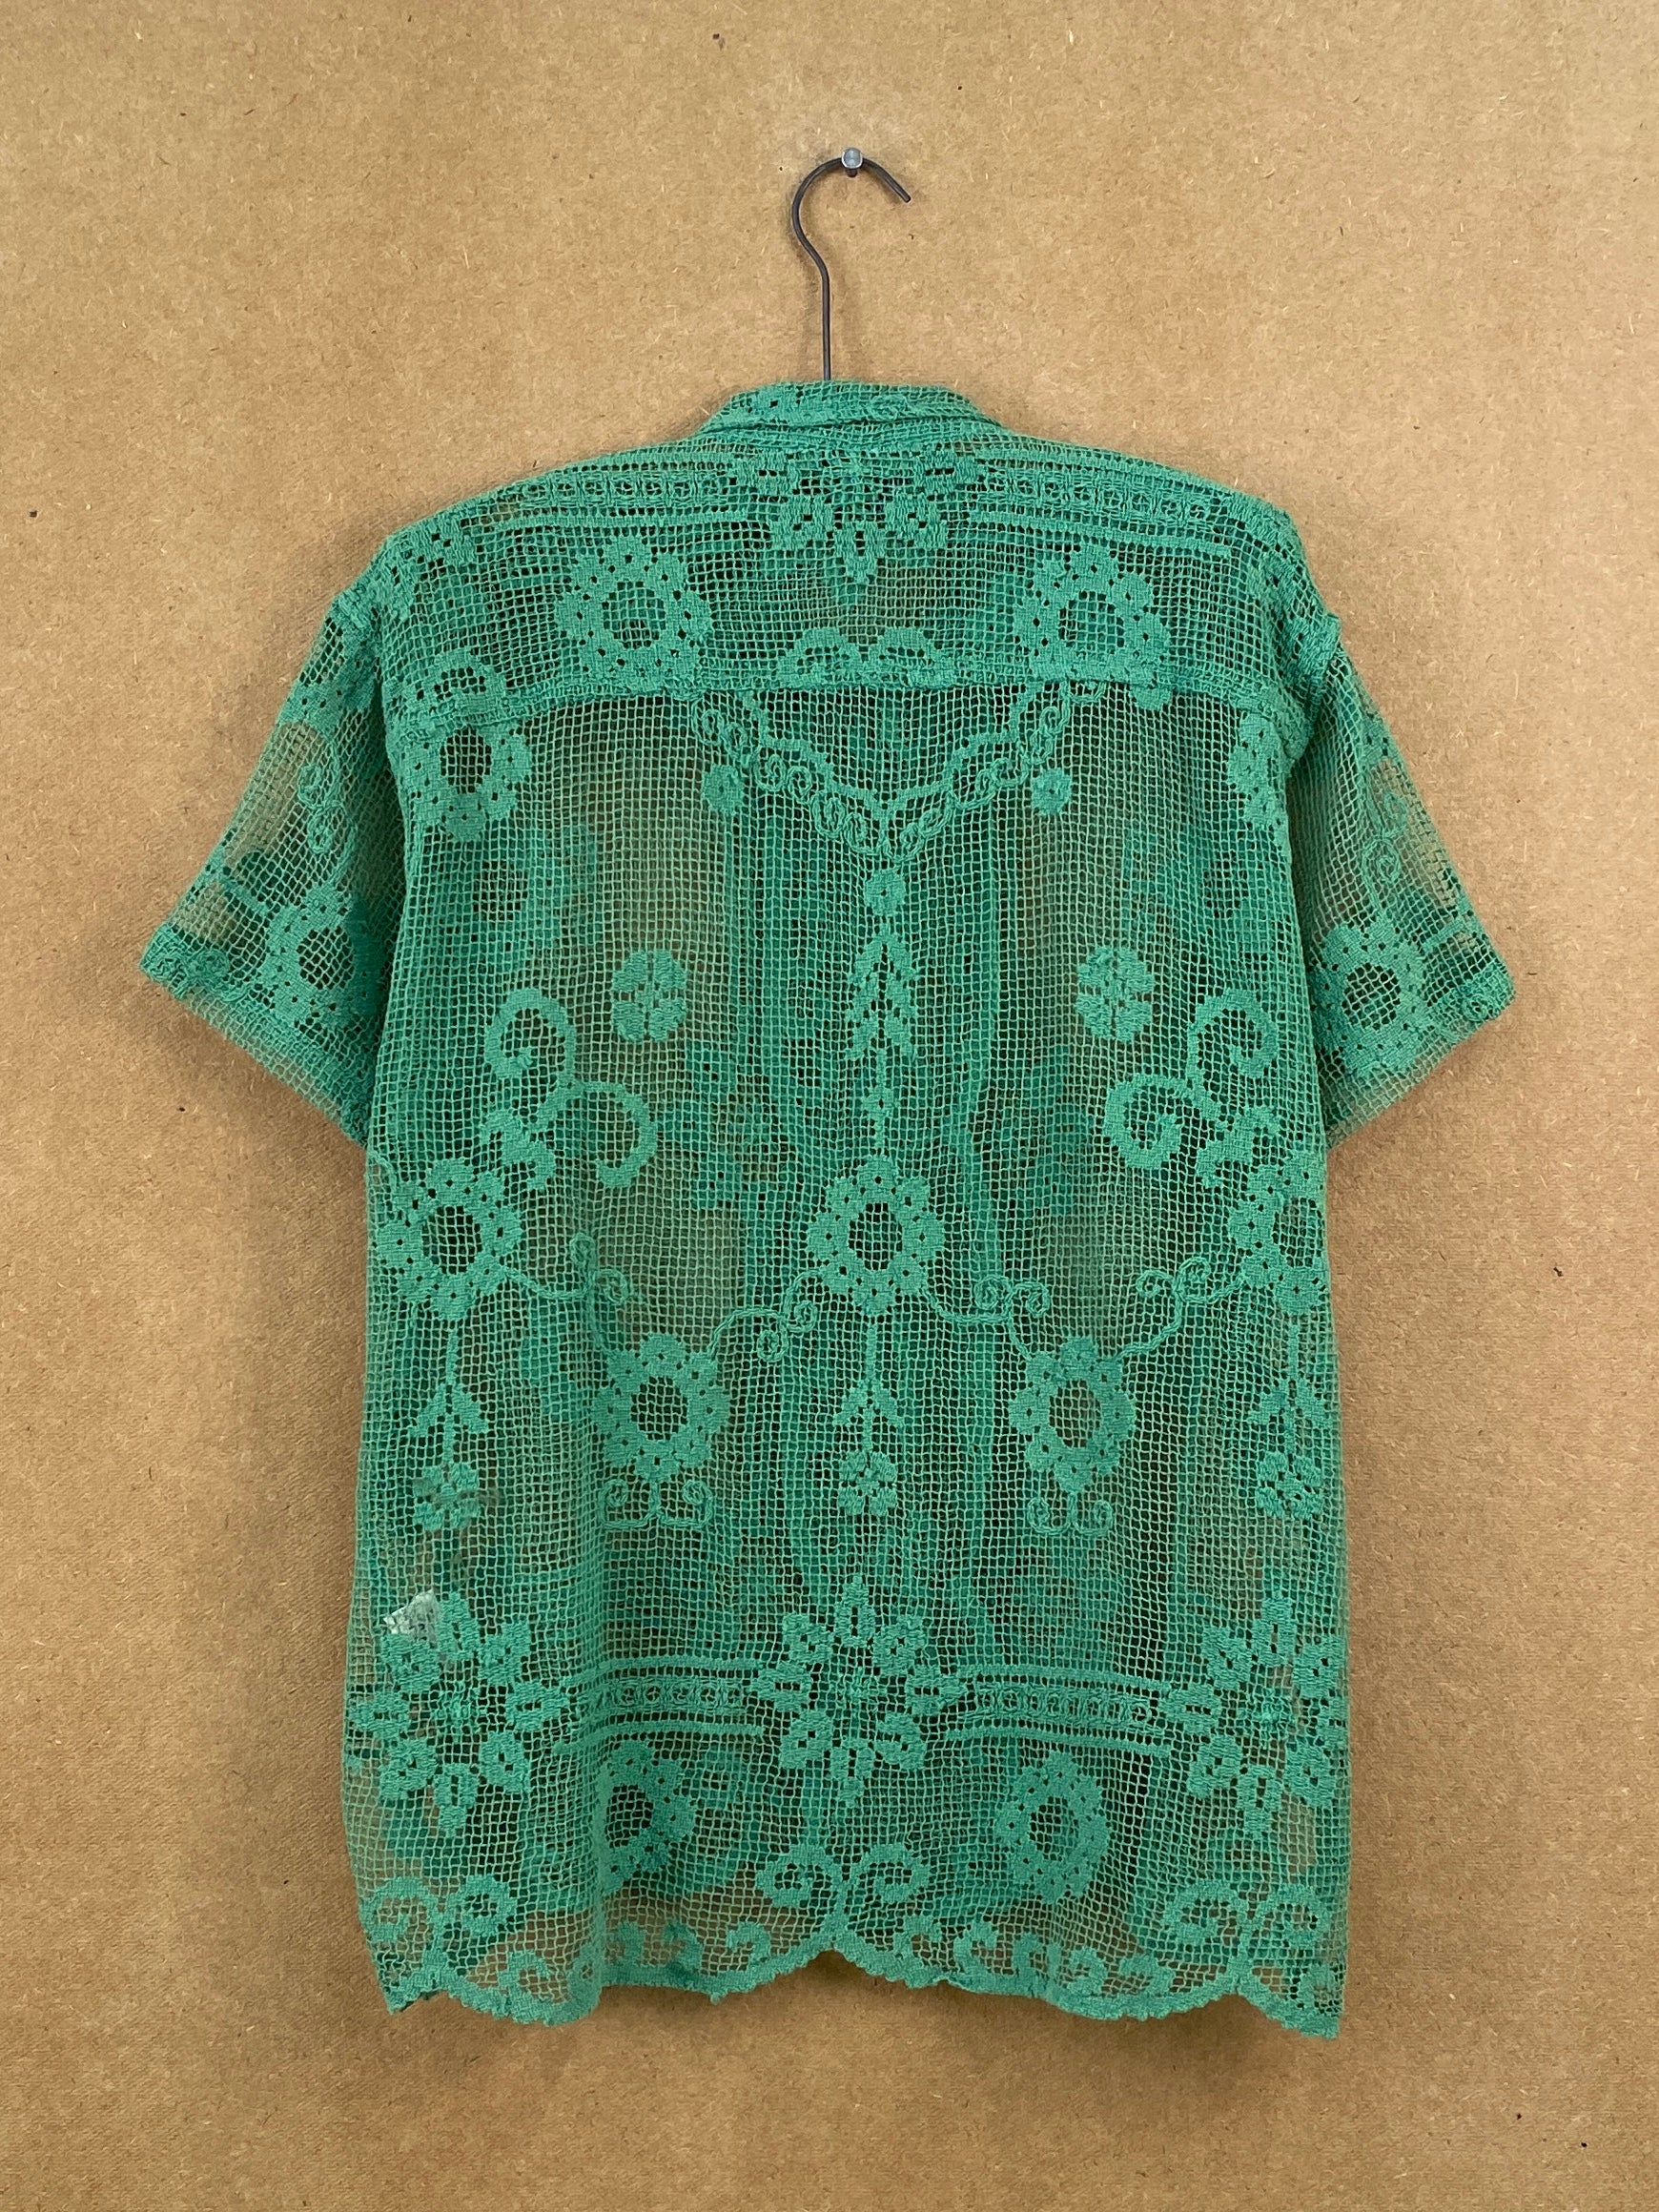 Luck Lace Shirt - S/M